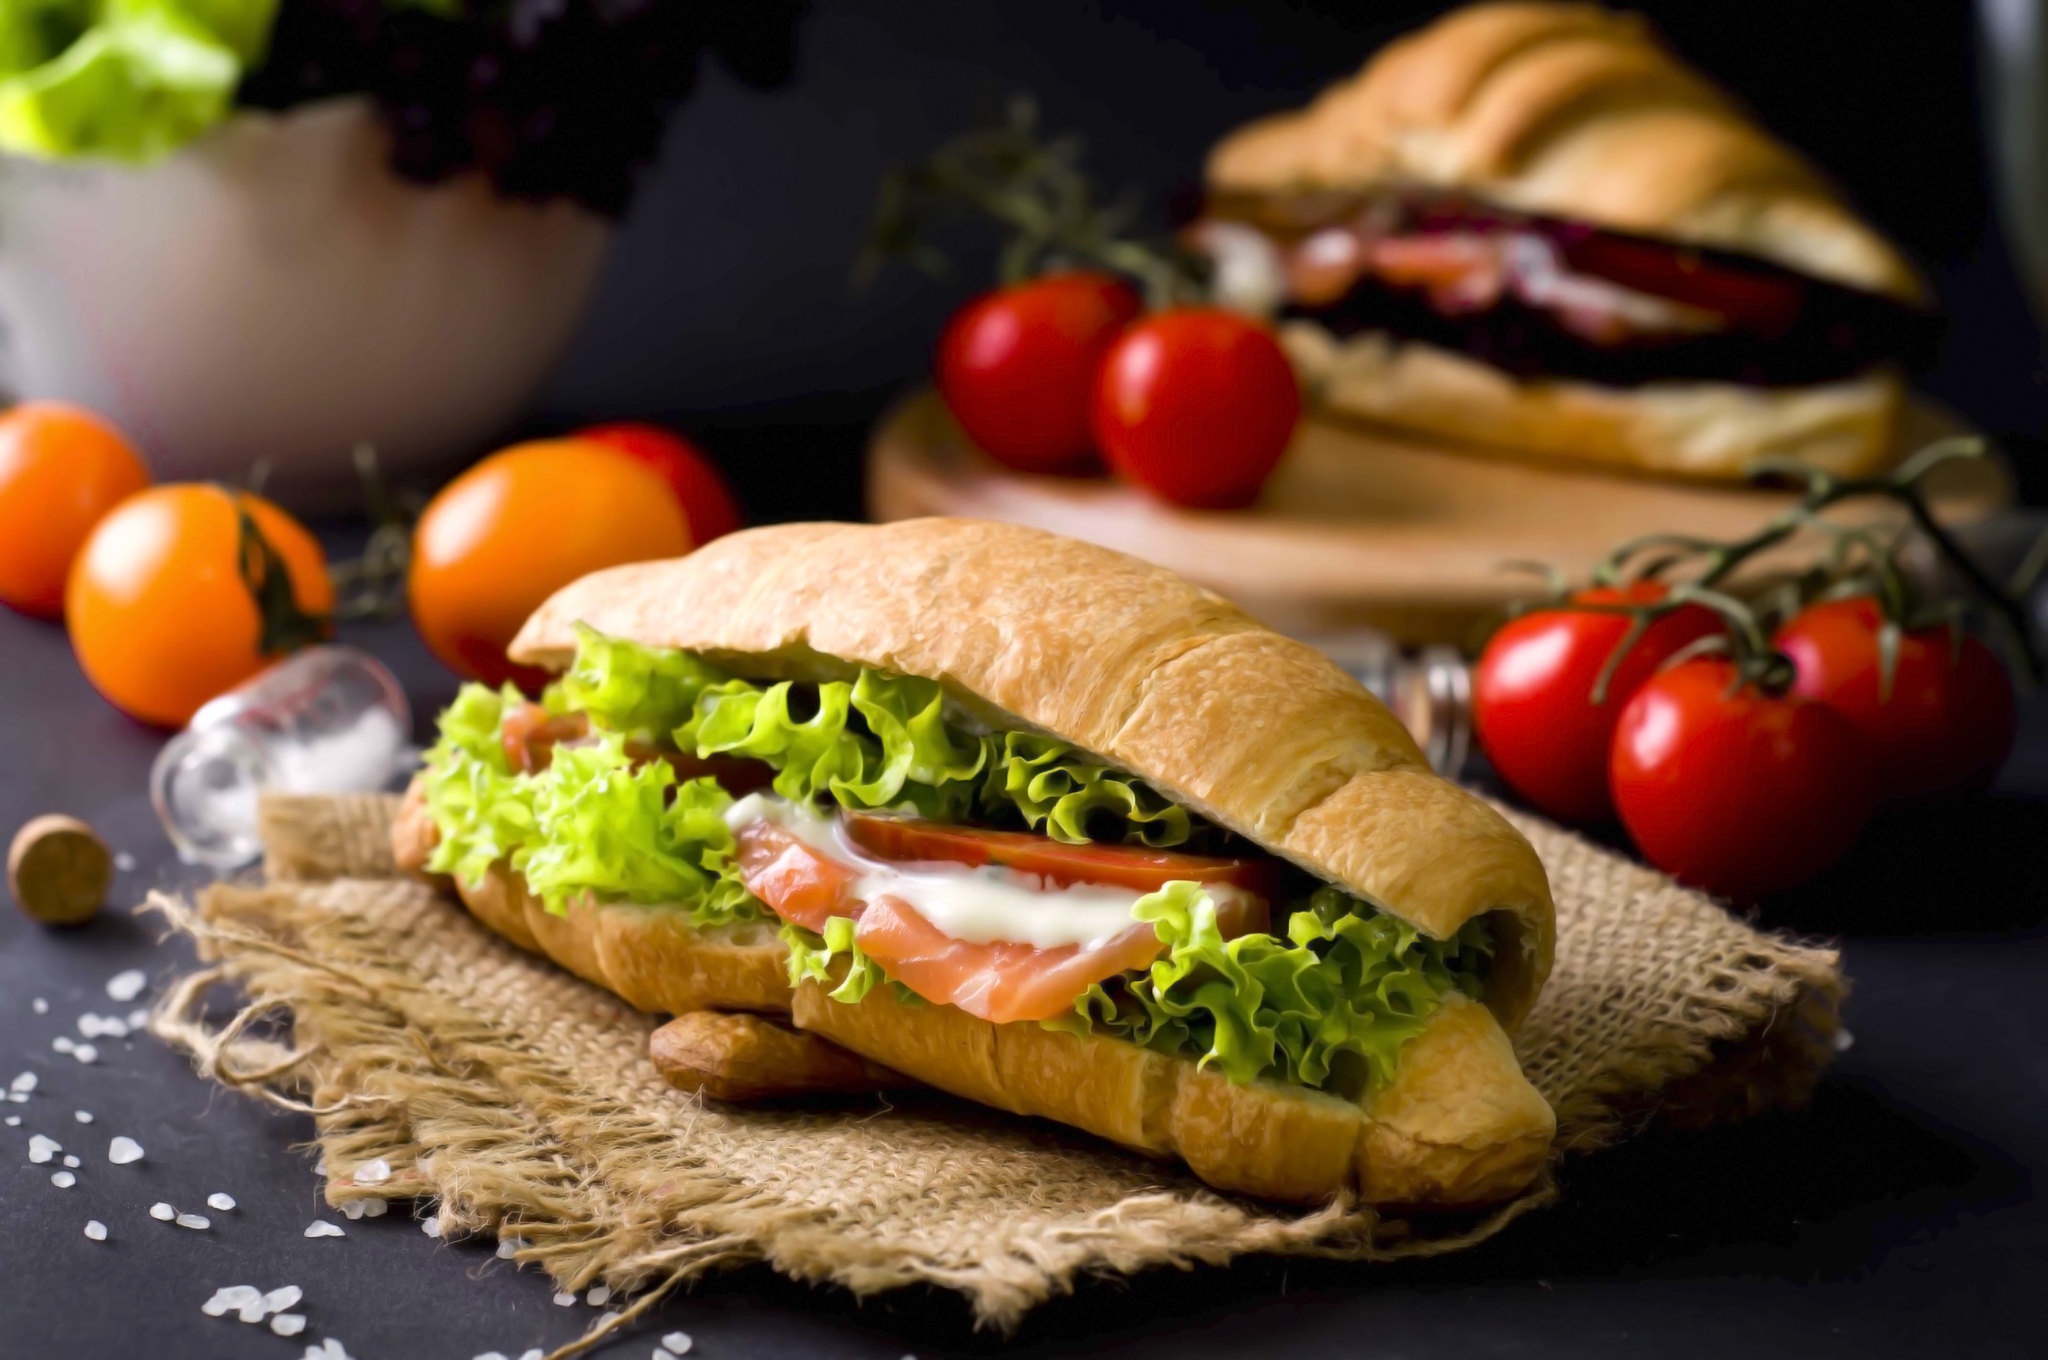 General 2048x1360 salad bread sandwiches vegetables tomatoes food closeup